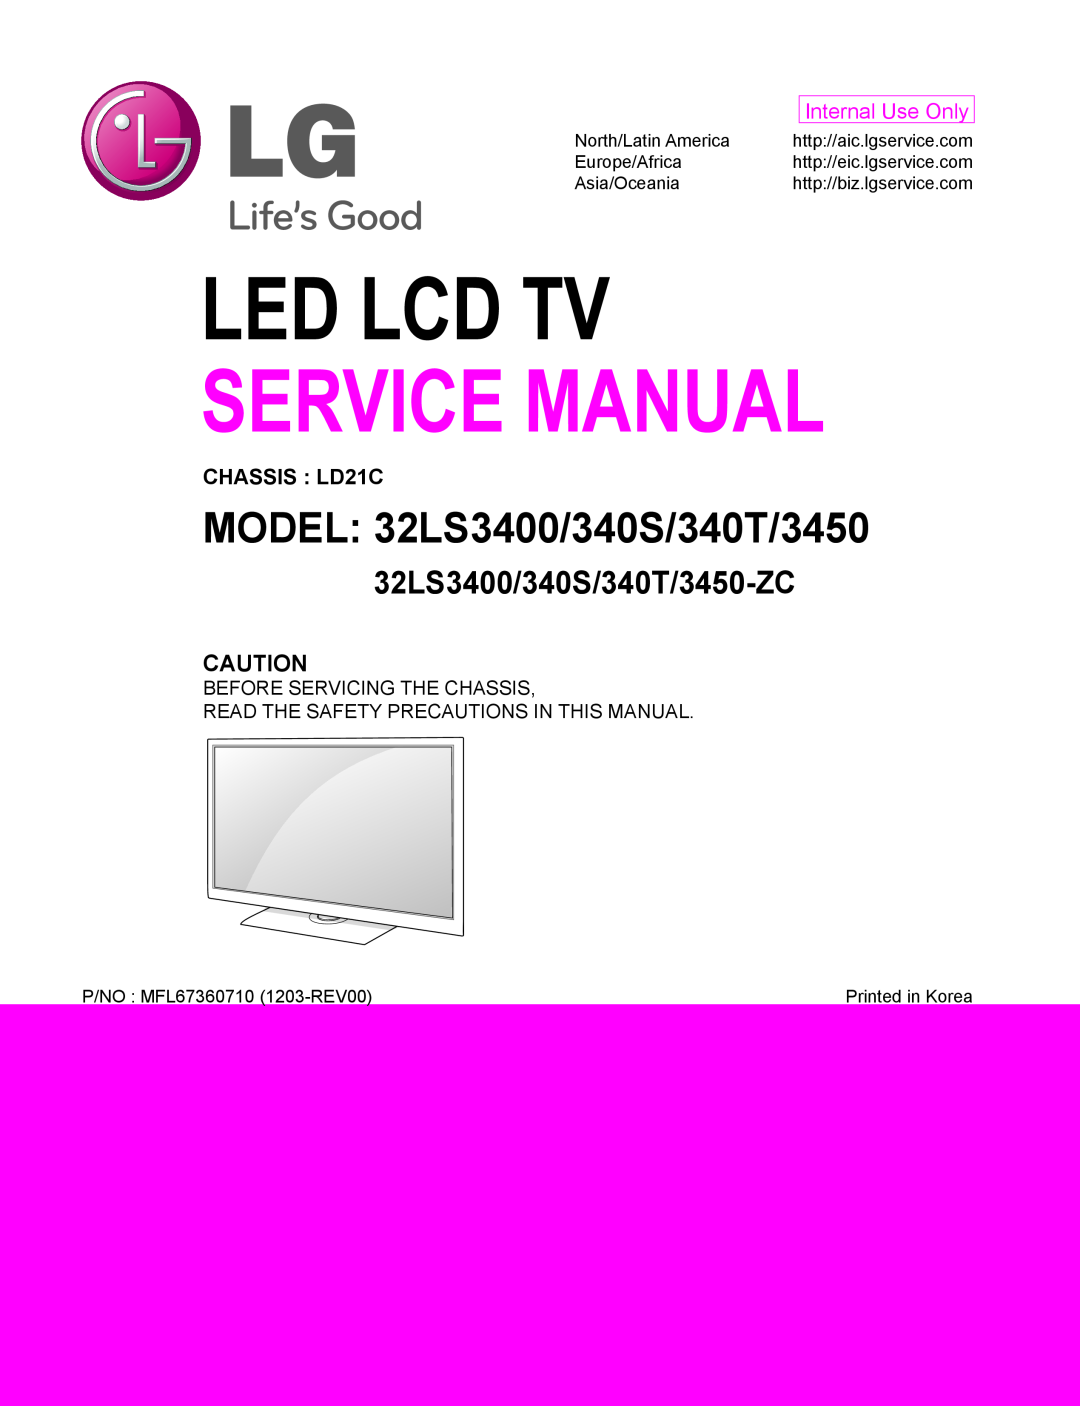 LG Electronics service manual CHASSIS LD21C, Led Lcd Tv, Service Manual, MODEL 32LS3400/340S/340T/3450, Europe/Africa 